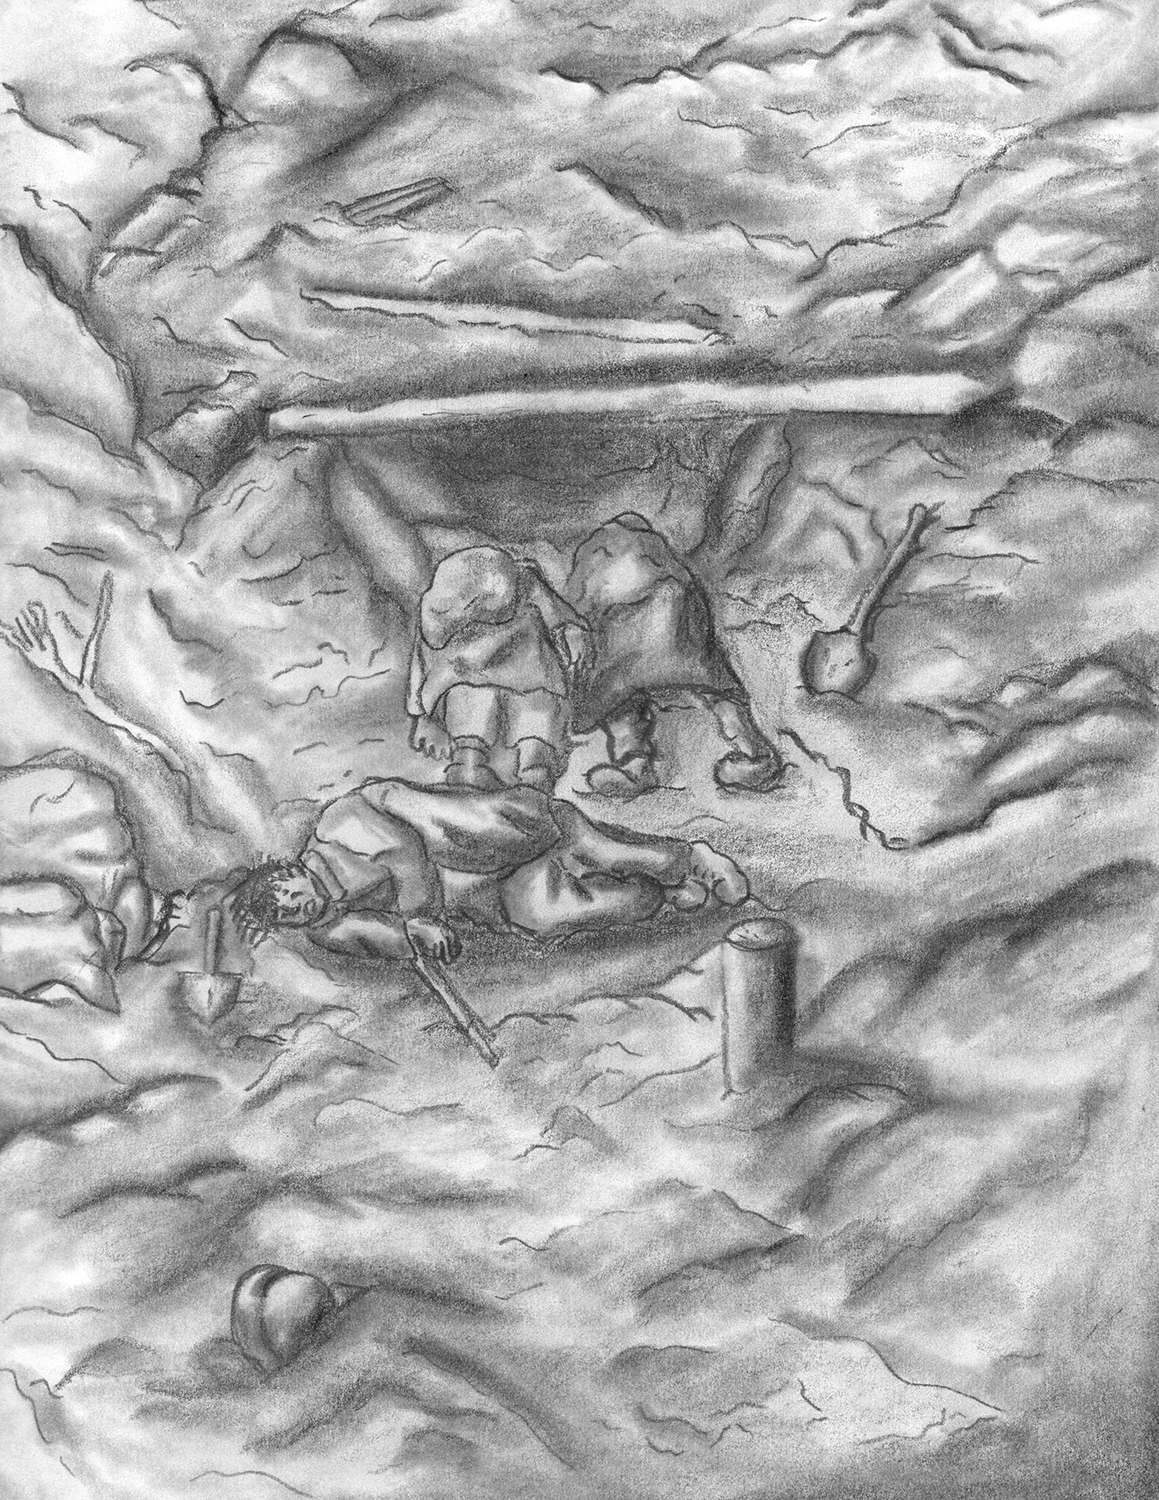 Carnage of War by Zach Blackley, graphite on paper - Innisdale Secondary School